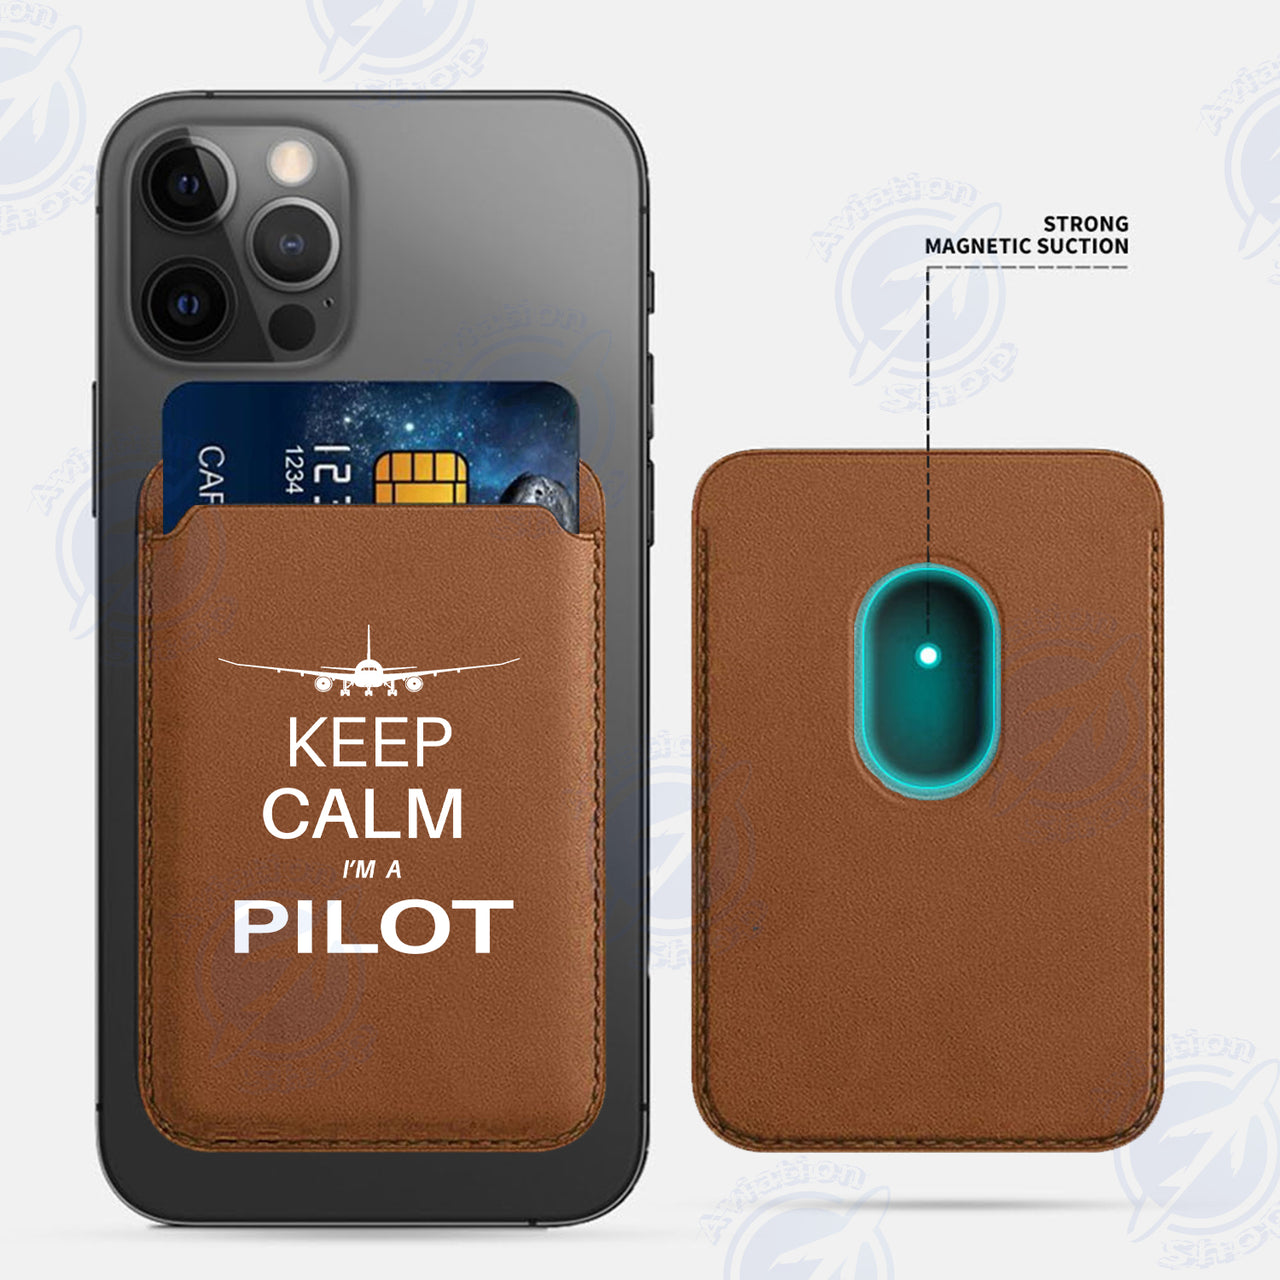 Pilot (777 Silhouette) iPhone Cases Magnetic Card Wallet